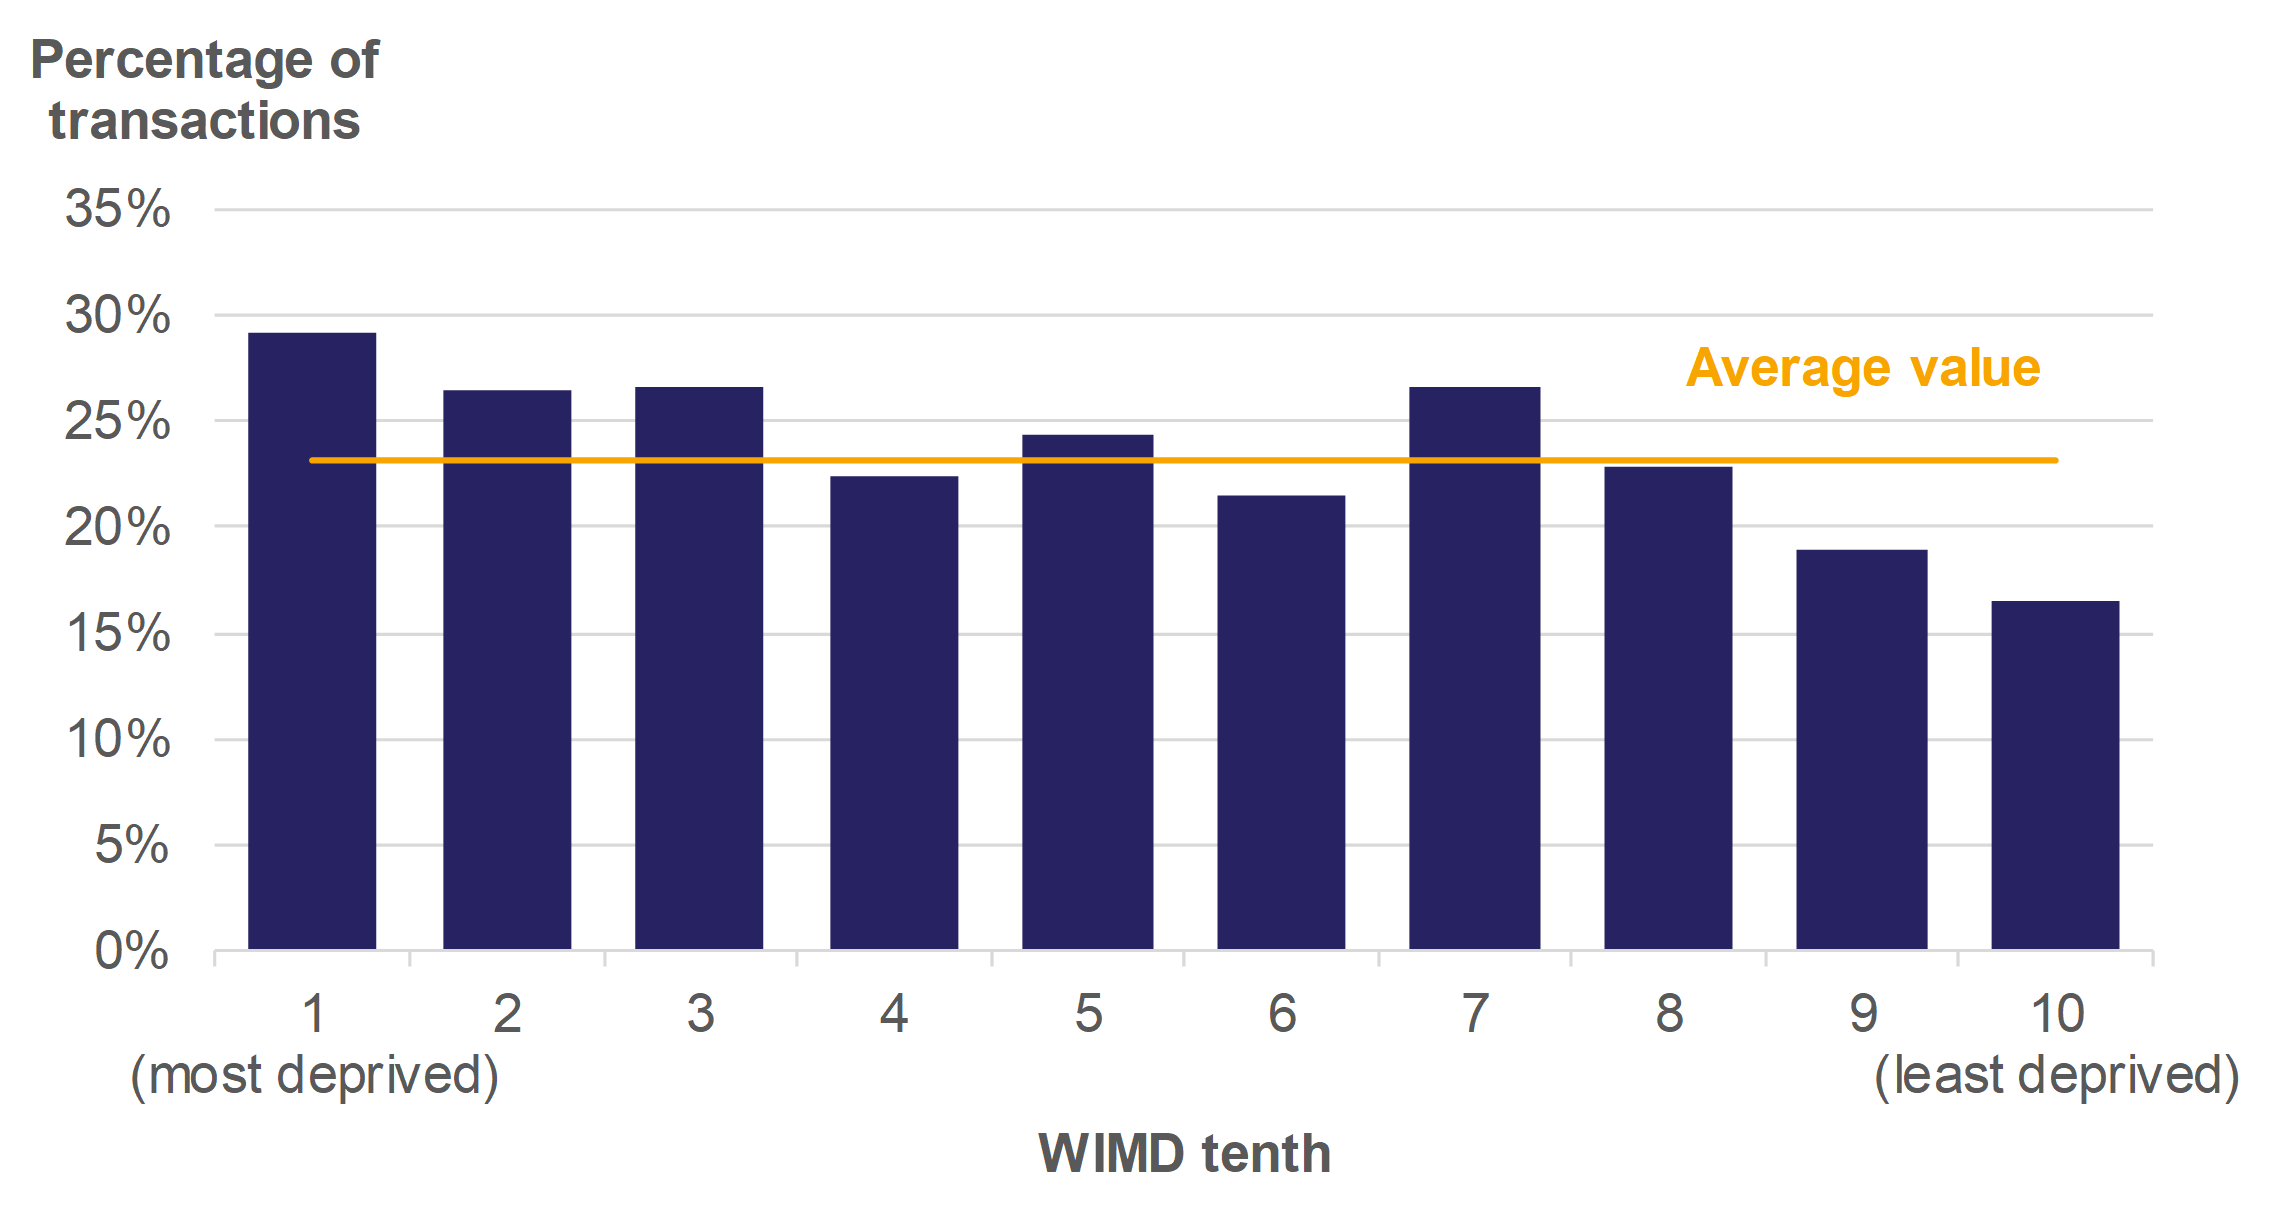 Figure 9.3 shows higher rate transactions as a percentage of all residential transactions, by WIMD tenth, for April 2018 to March 2019. An average value over all WIMD tenths is also presented.